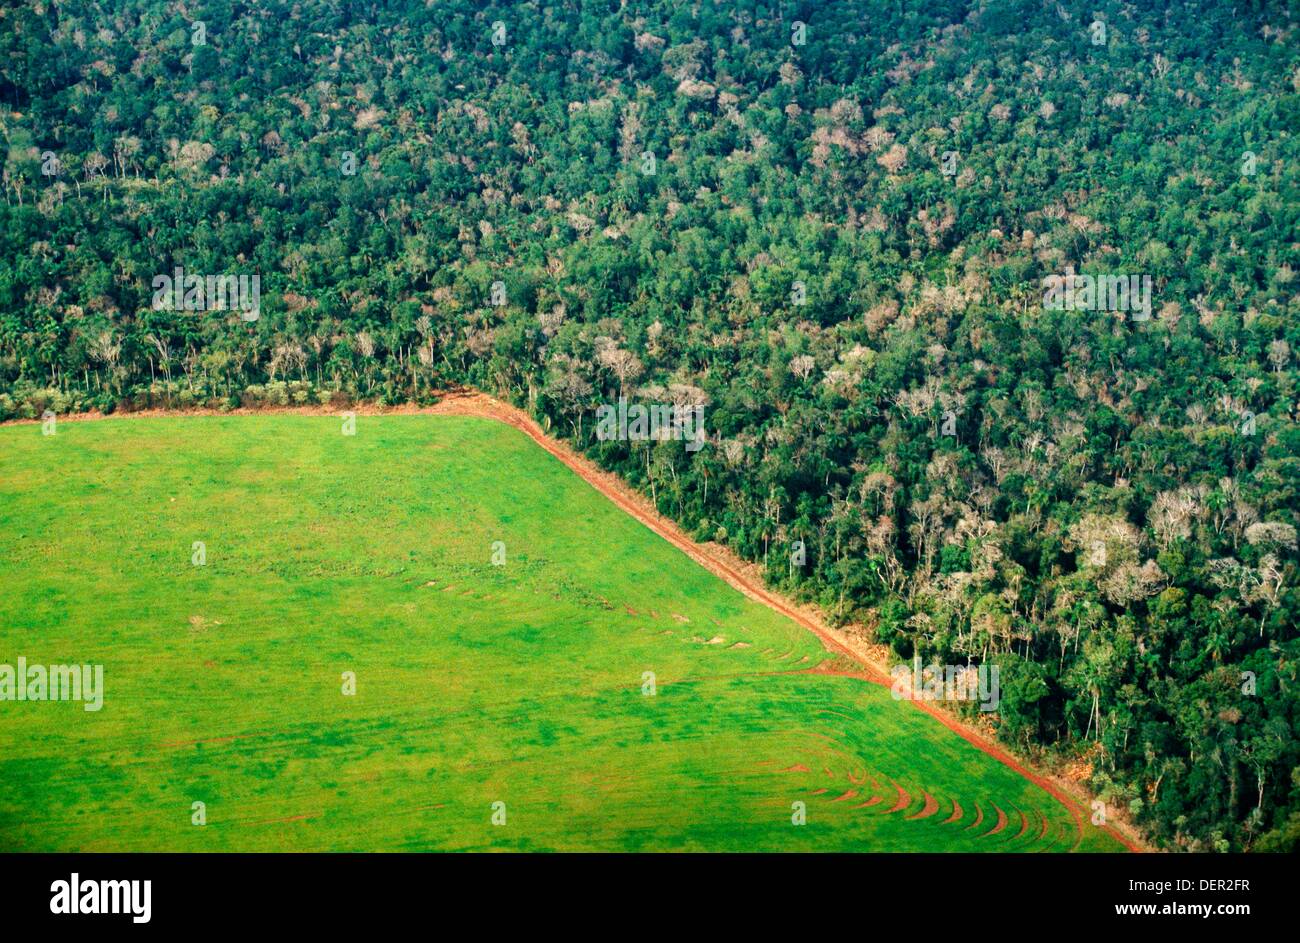 Deforestation of the Amazon jungle as seen from the air, Amazon rainforest, Brazil Stock Photo